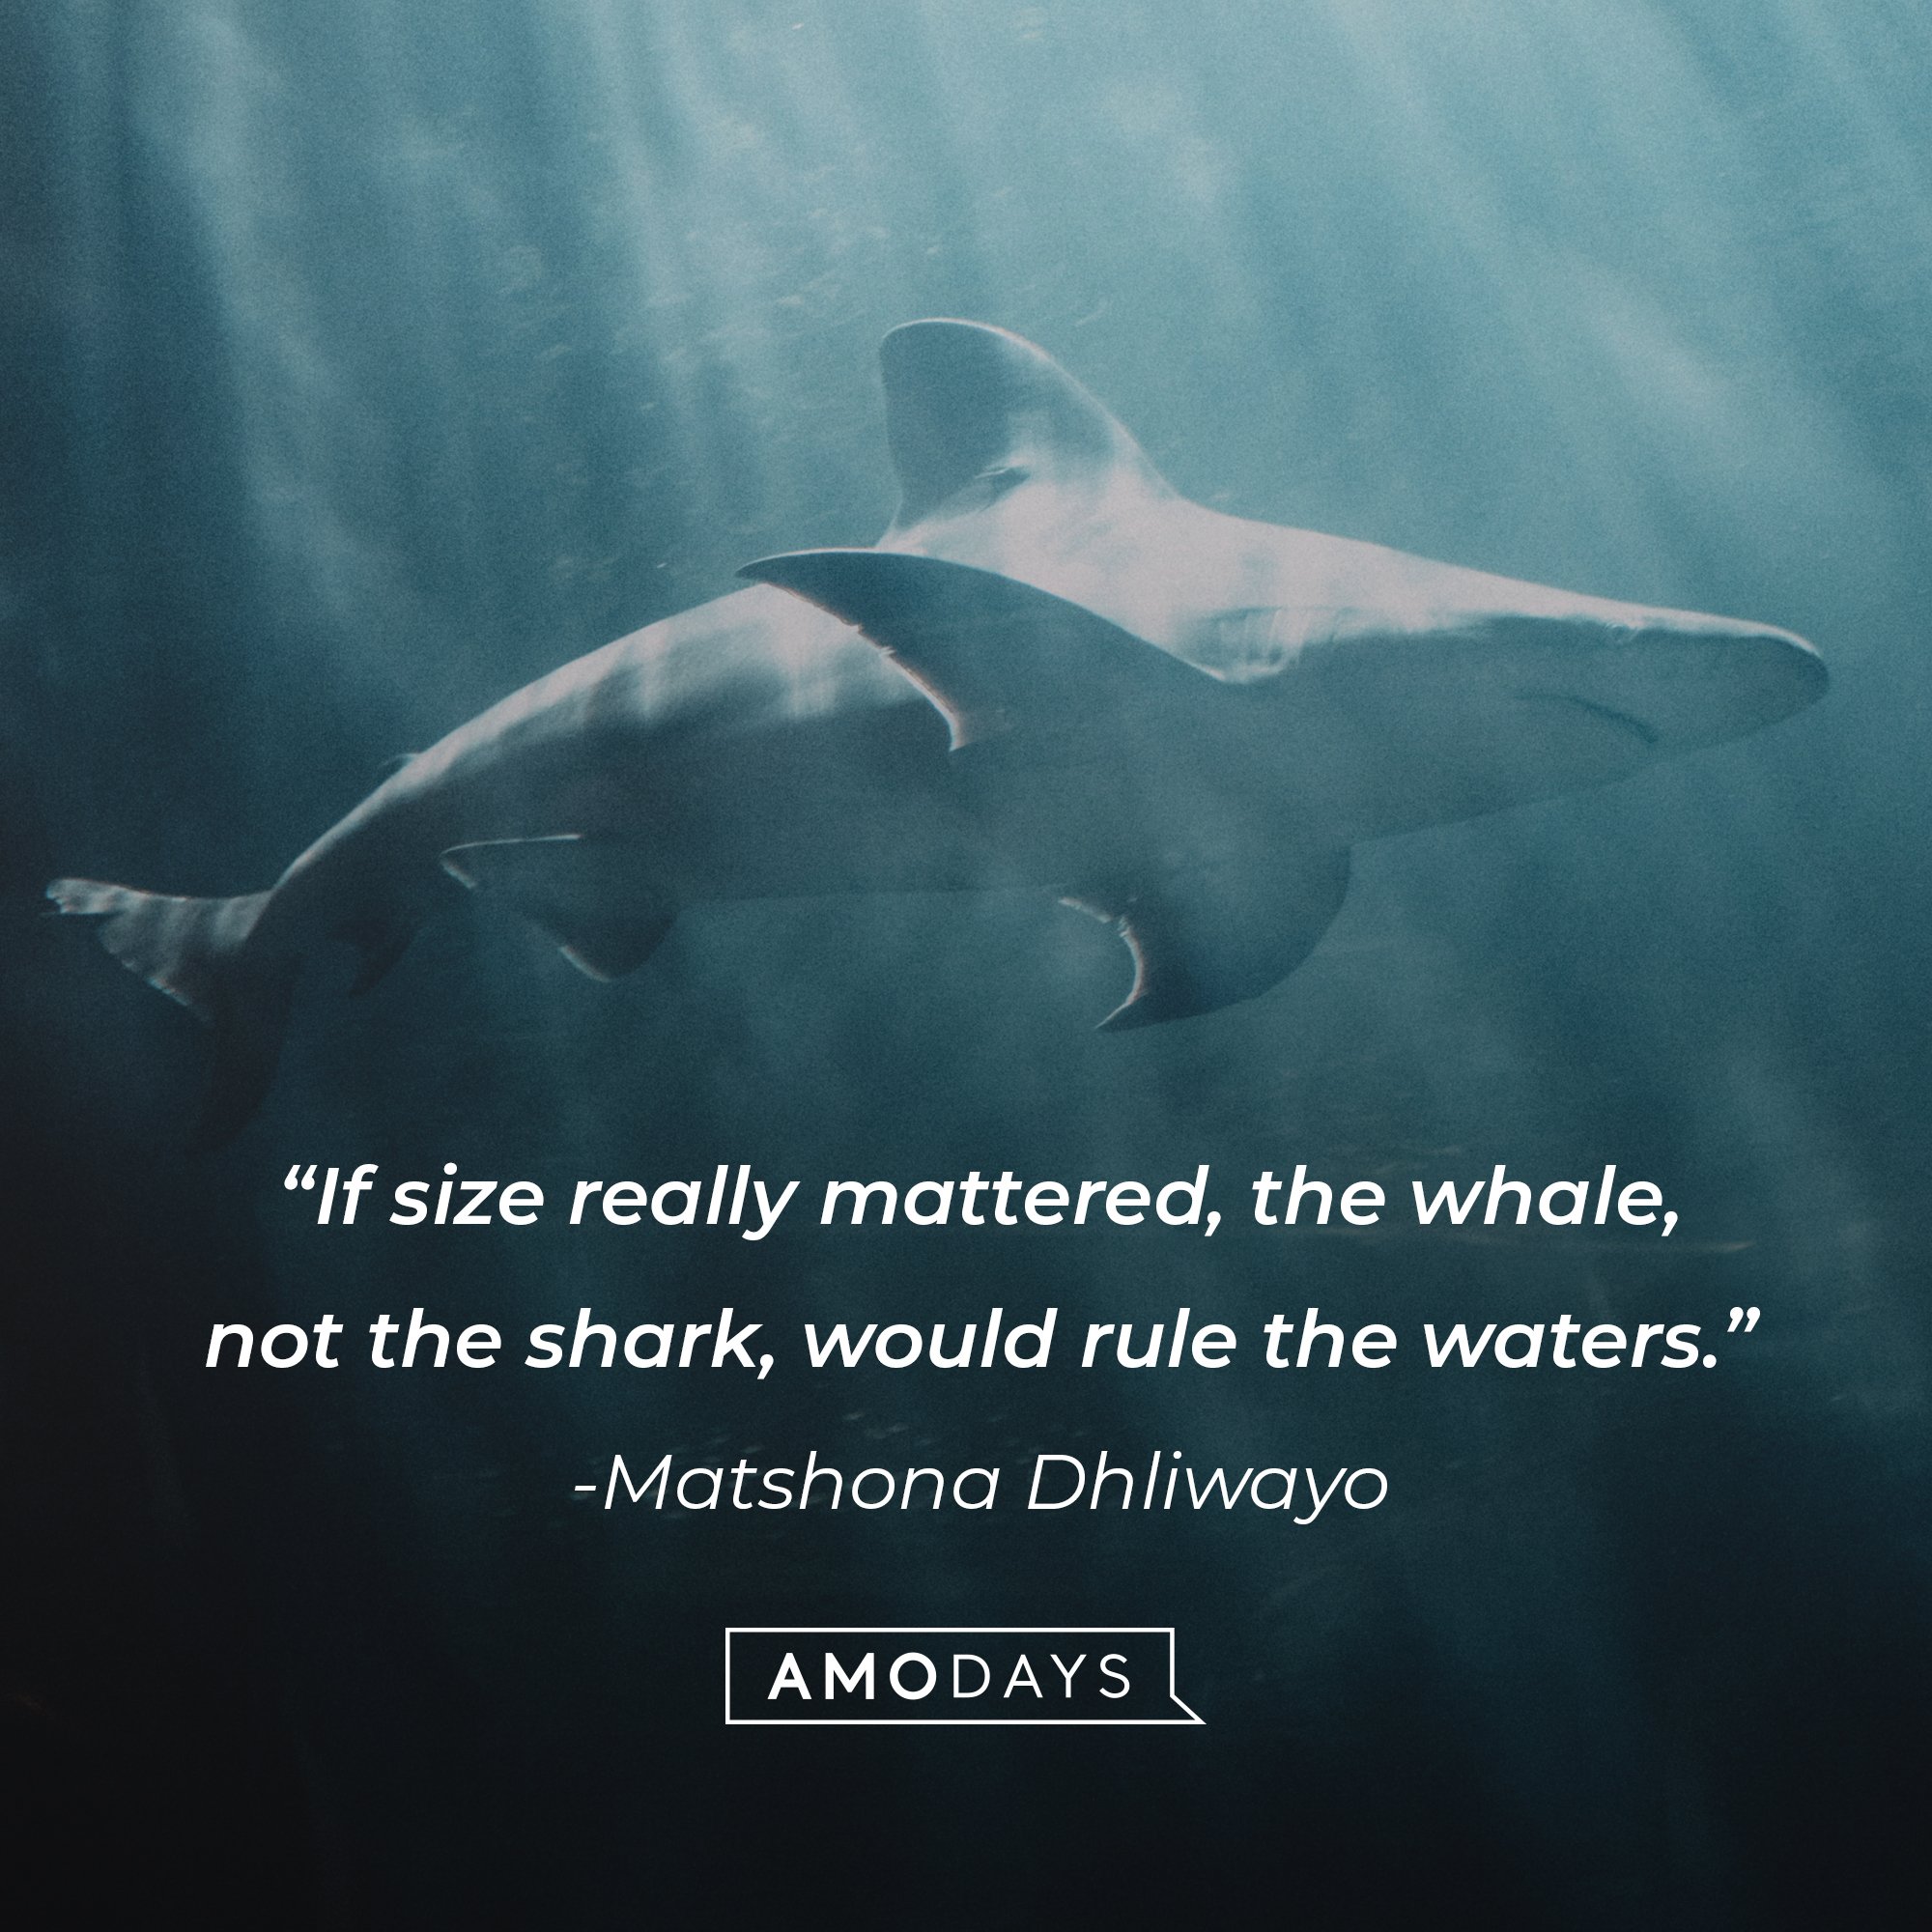 Matshona Dhliwayo's quote: “If size really mattered, the whale, not the shark, would rule the waters.” | Image: AmoDays  